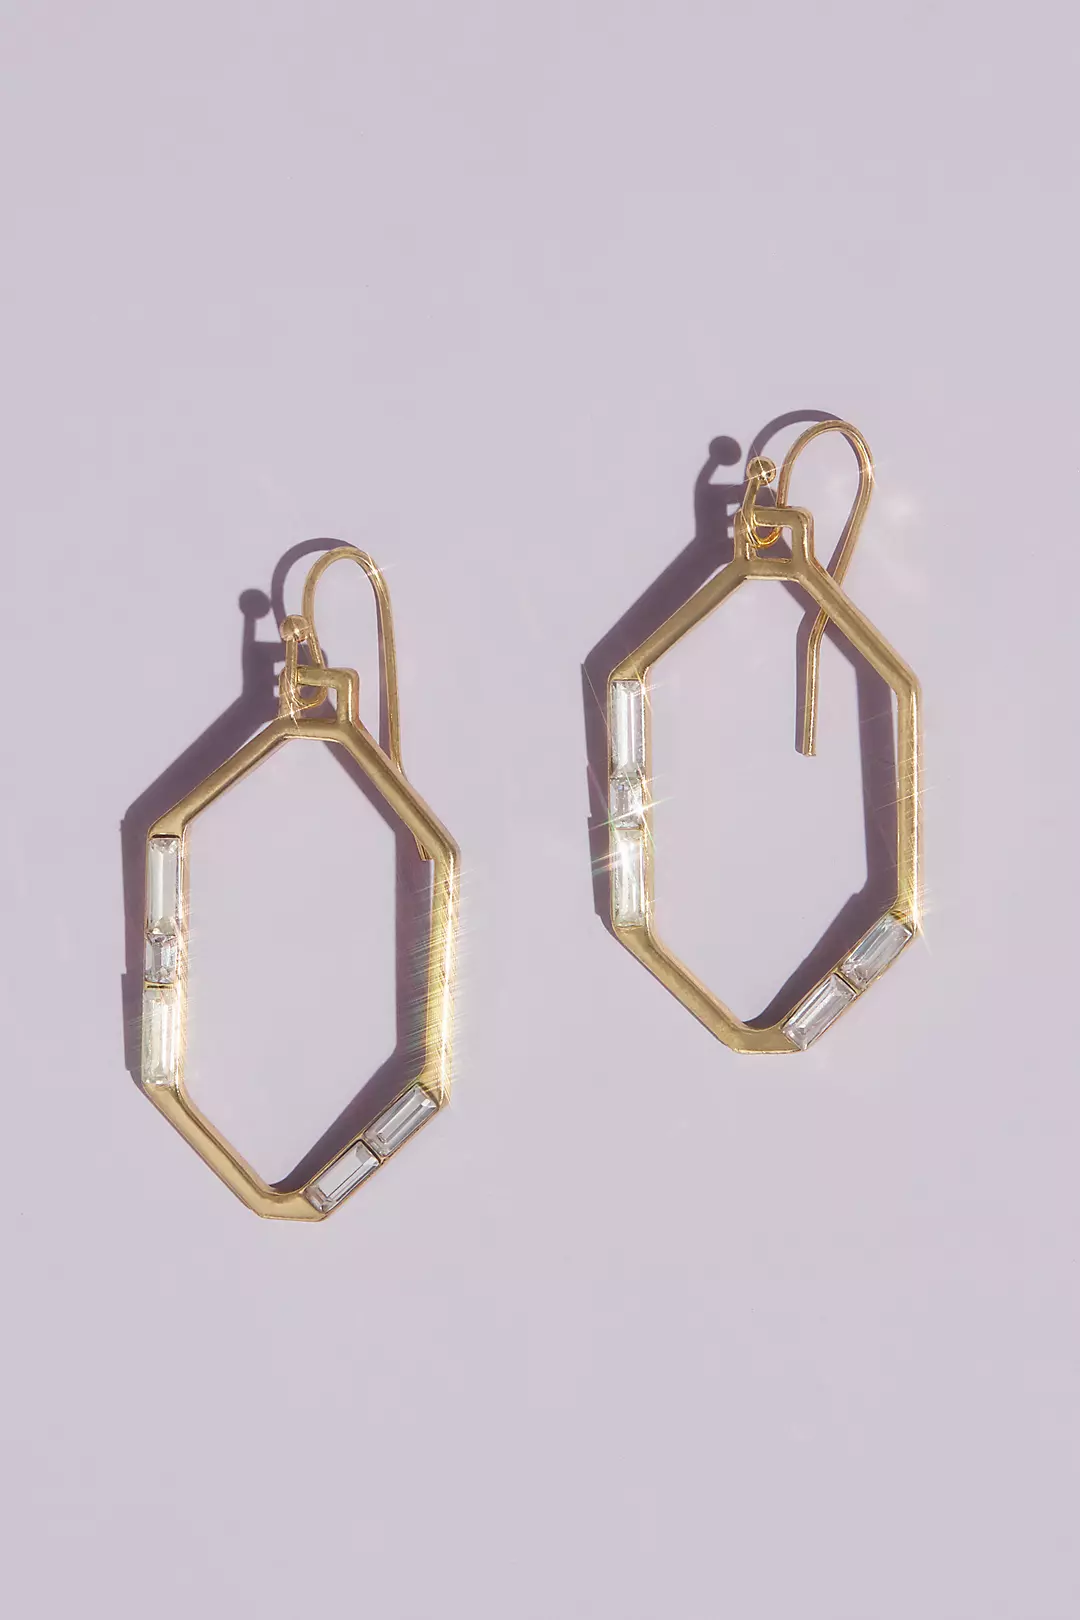 Gilded Hexagon Earrings with Baguette Crystals Image